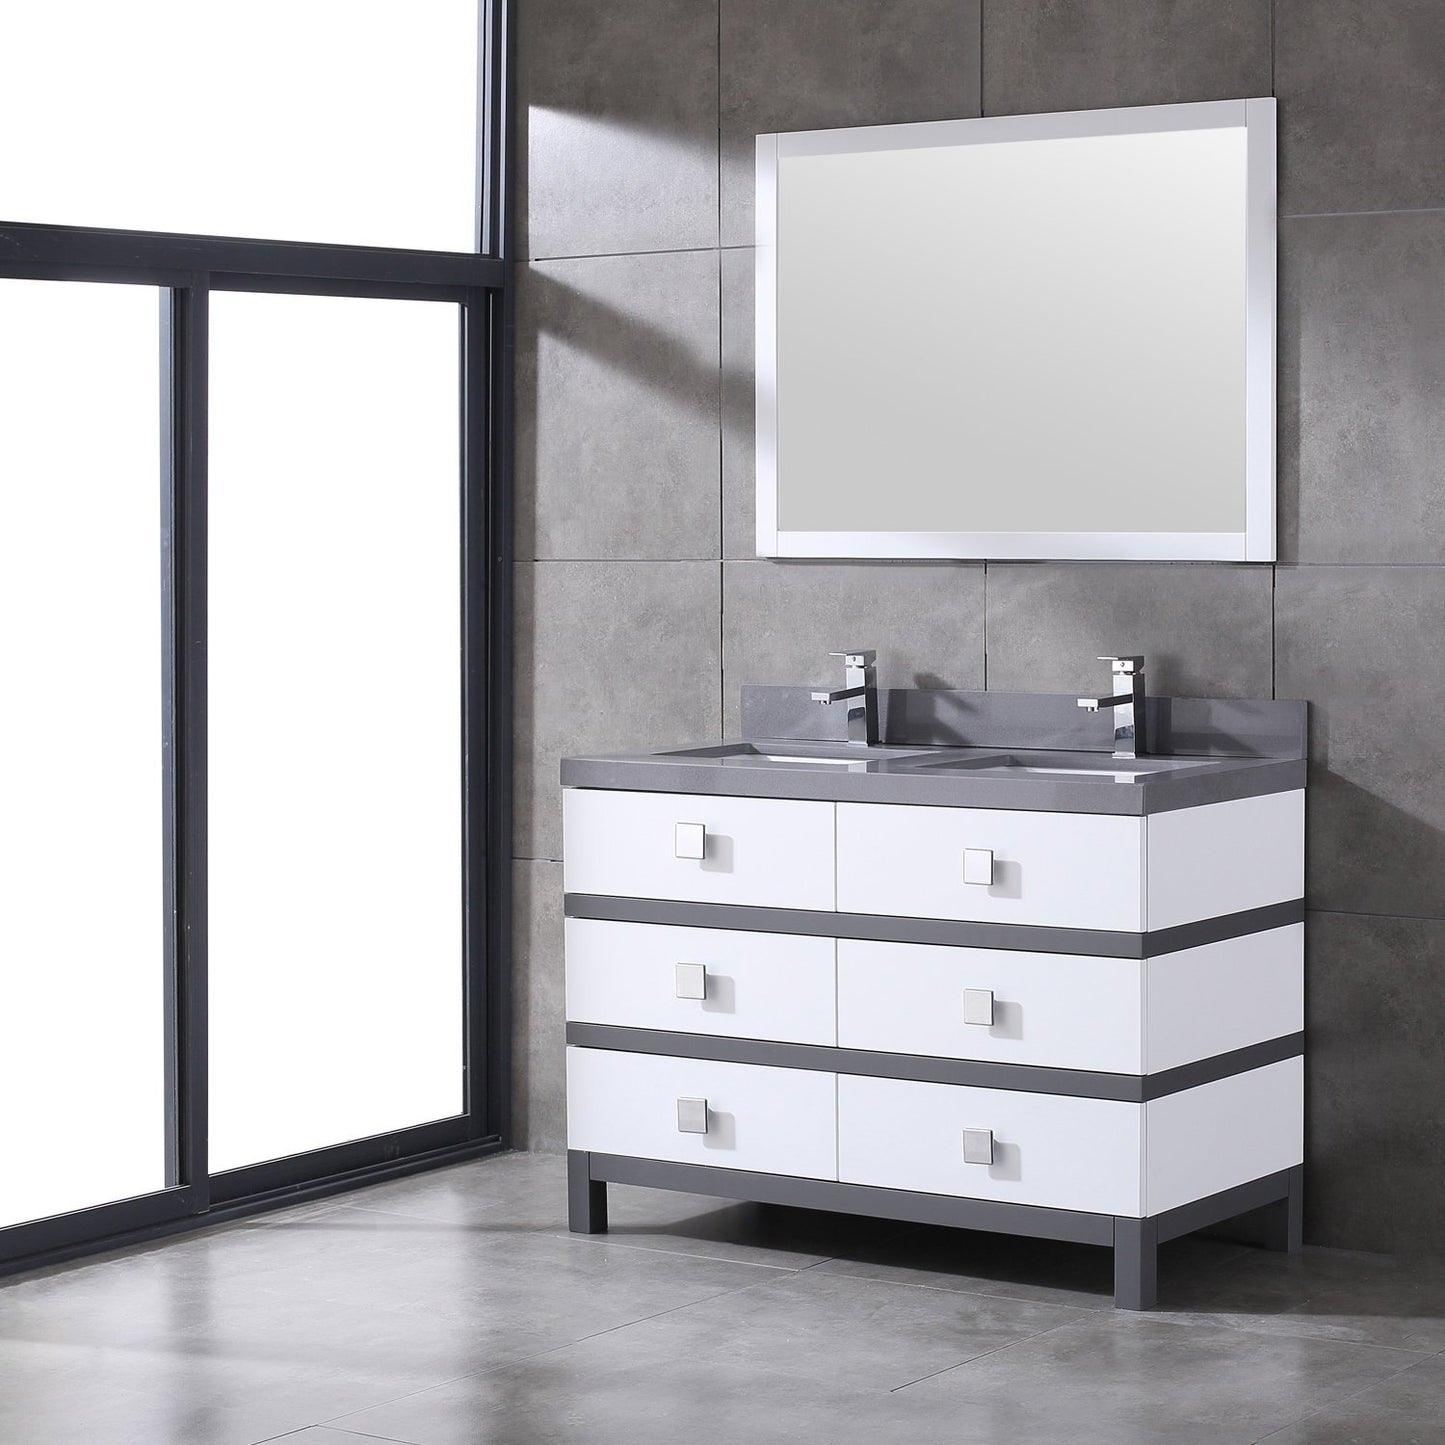 Eviva Sydney 48 Inch White and Grey Bathroom Vanity with Solid Quartz Counter-top - Luxe Bathroom Vanities Luxury Bathroom Fixtures Bathroom Furniture